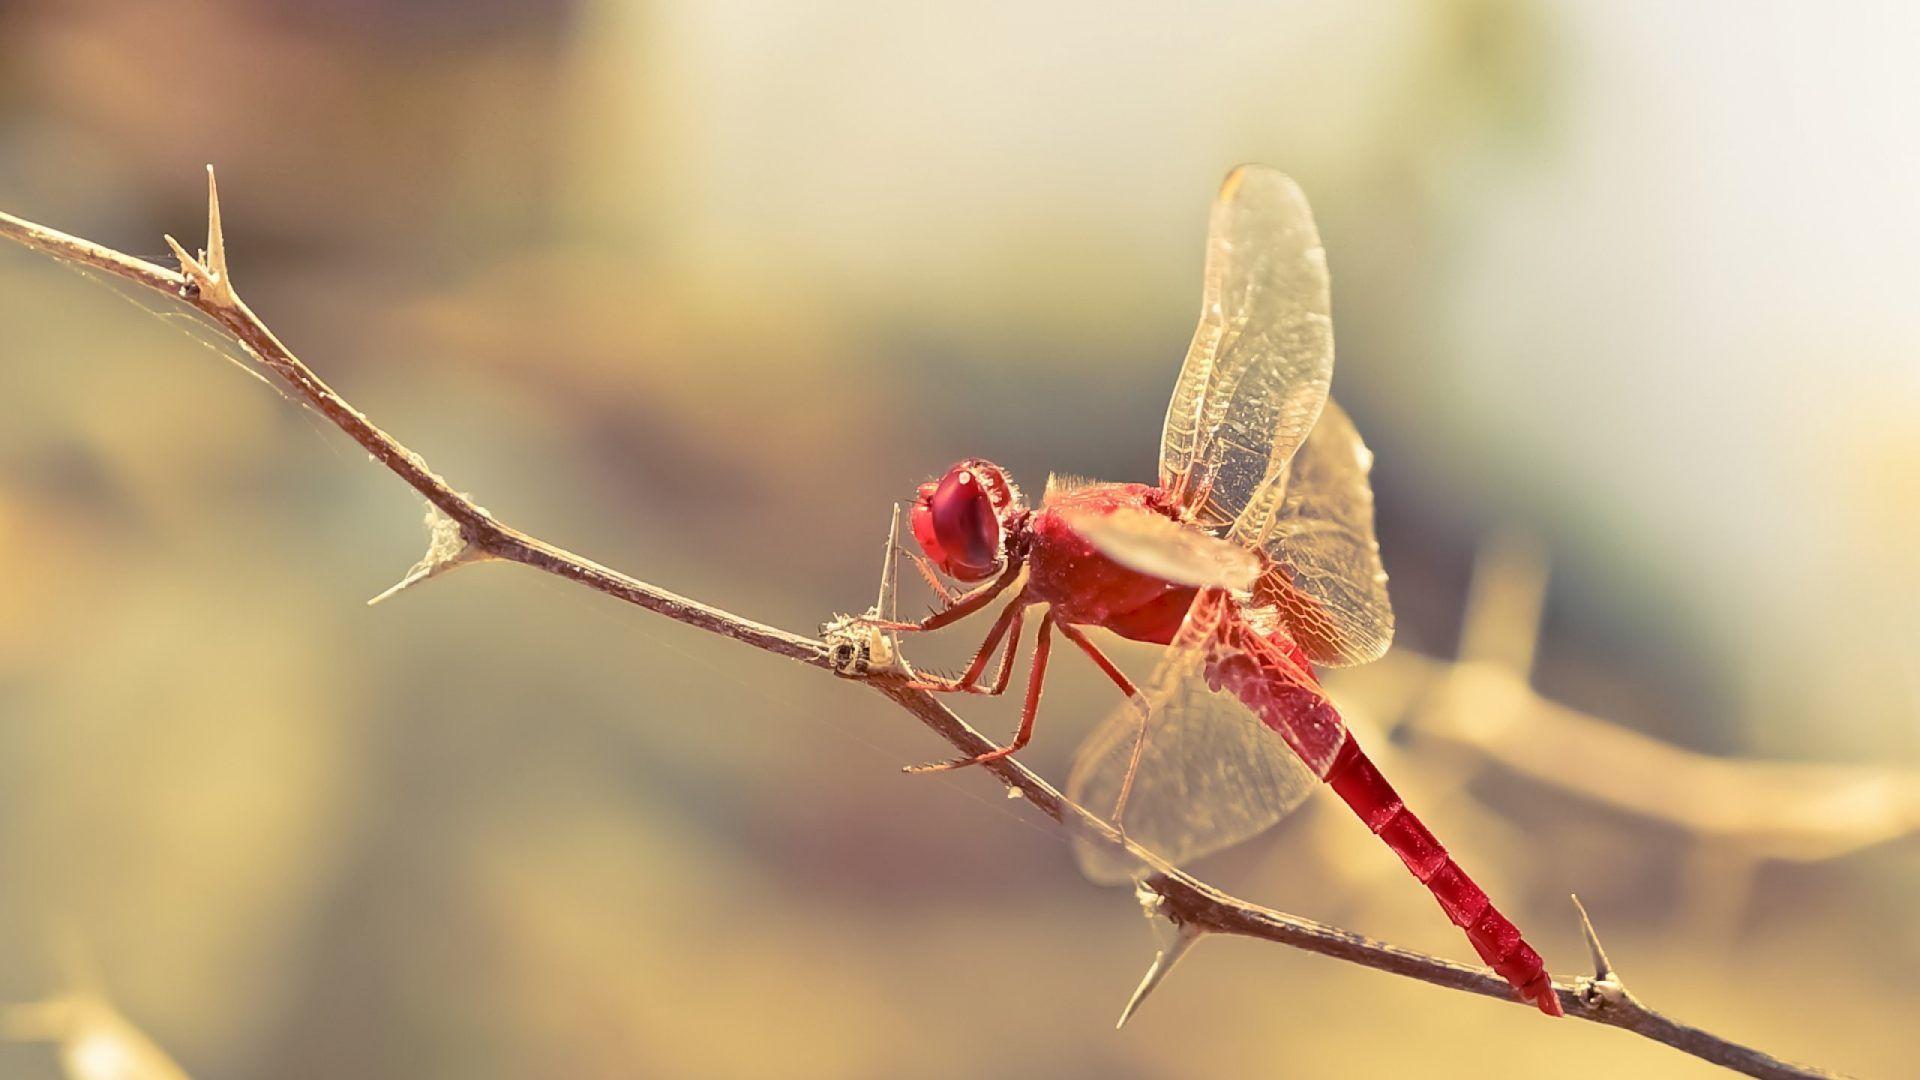 Dragonfly Tag wallpaper: Remembering Fall Autumn Dragonfly Grass